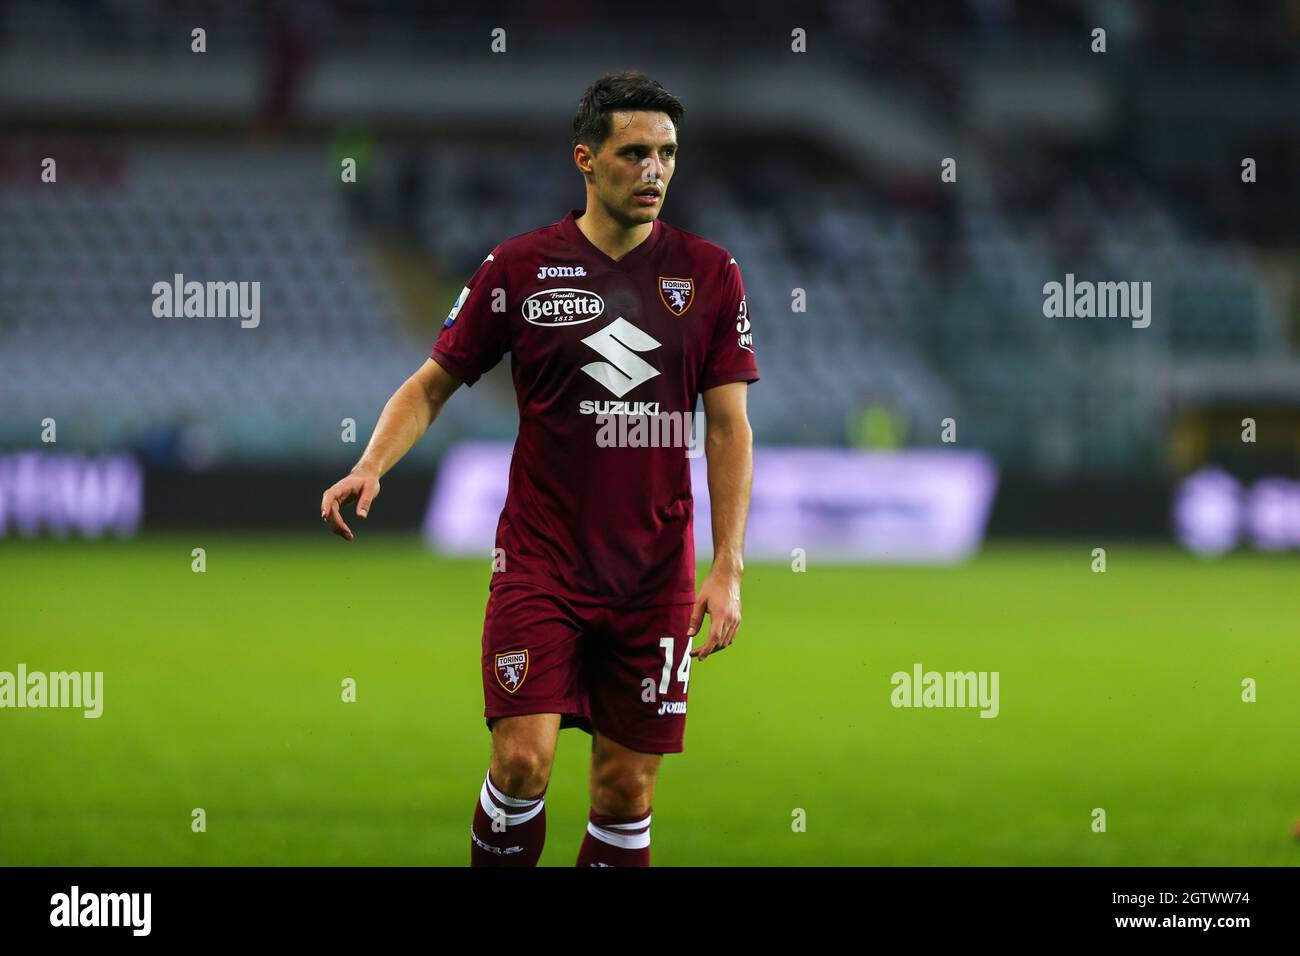 TURIN, ITALY. 02 OCTOBER 2021. Josip Brekalo of Torino FC during the Serie A match between Torino FC and Juventus FC on 23 September 2021 at Olympic Grande Torino Stadium. Credit: Massimiliano Ferraro/Medialys Images/Alamy Live News Stock Photo